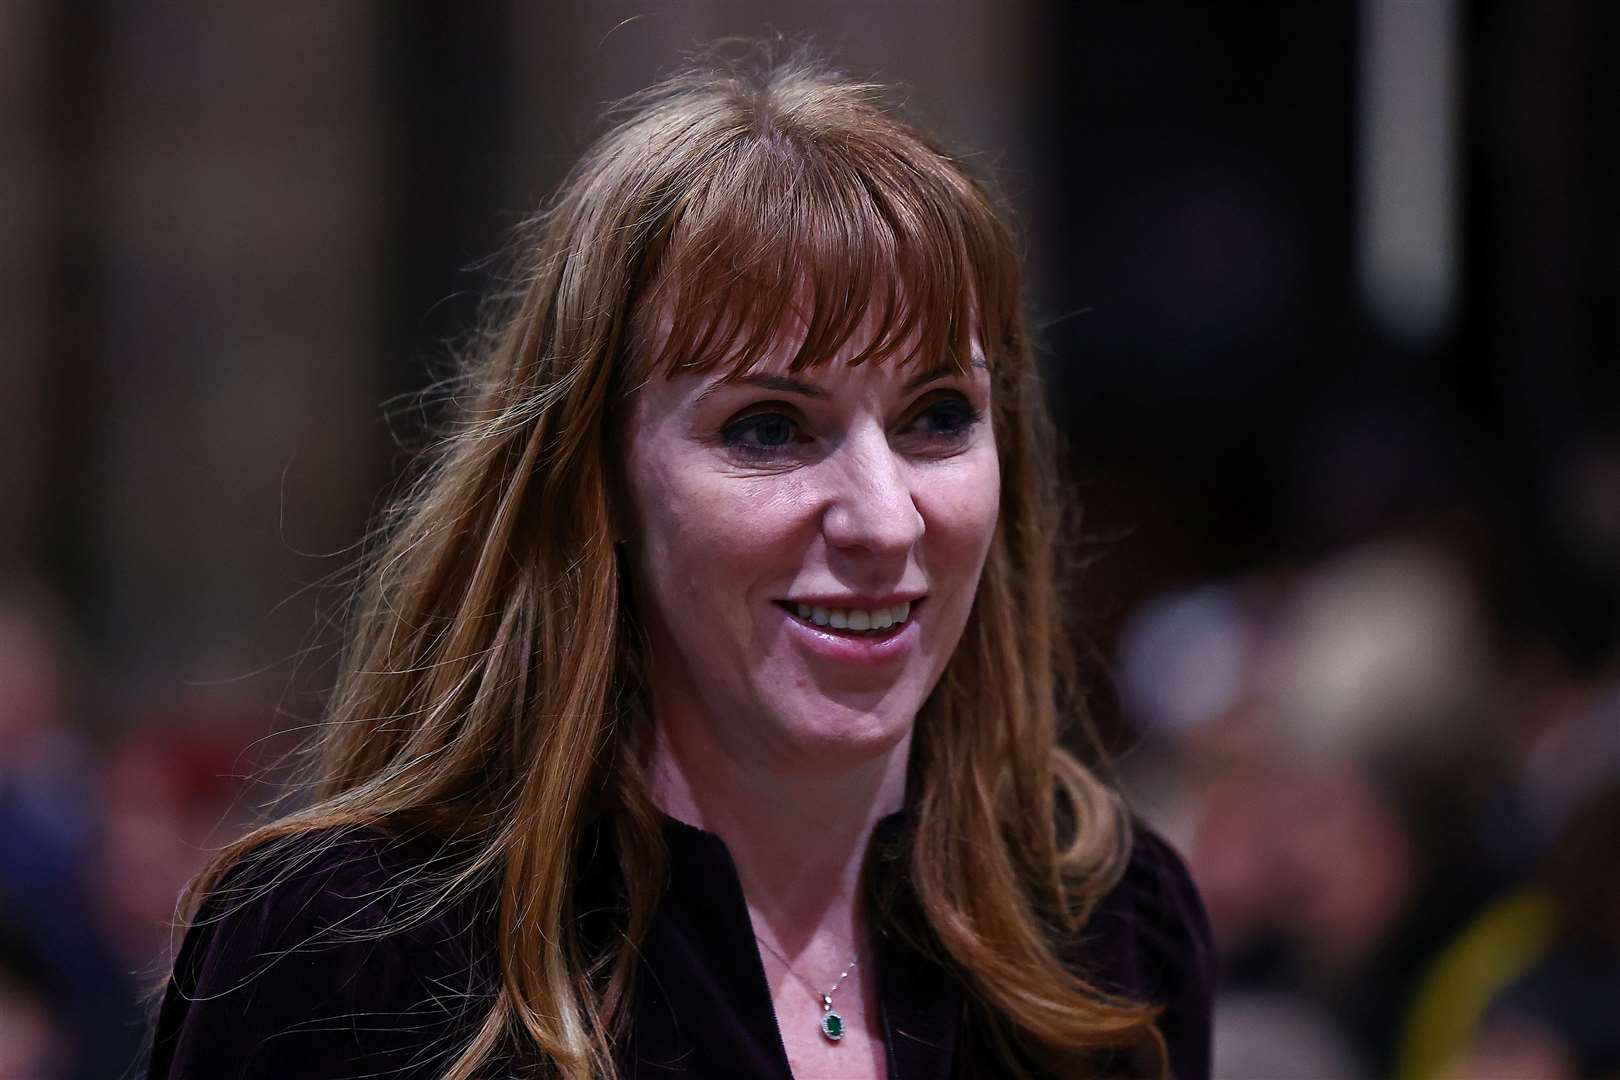 Deputy Labour Party leader Angela Rayner has maintained she has done nothing wrong (PA)